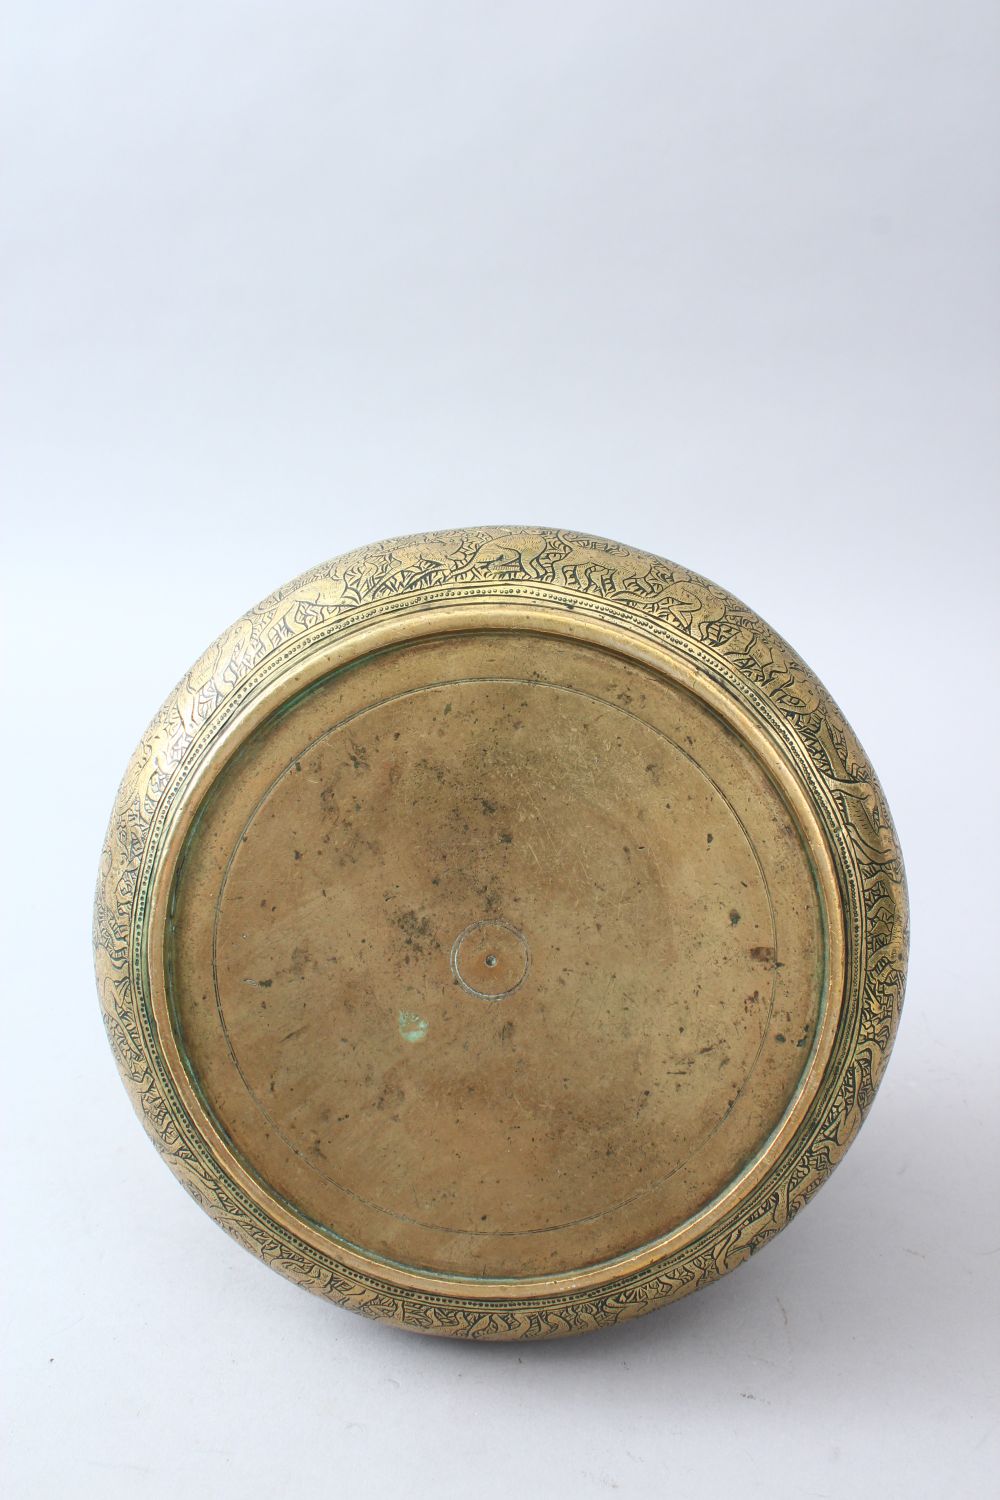 A VERY FINE 18TH/19TH CENTURY QAJAR HAND CHASED BRASS BOWL WITH SWING HANDLE, the body engraved with - Image 7 of 7